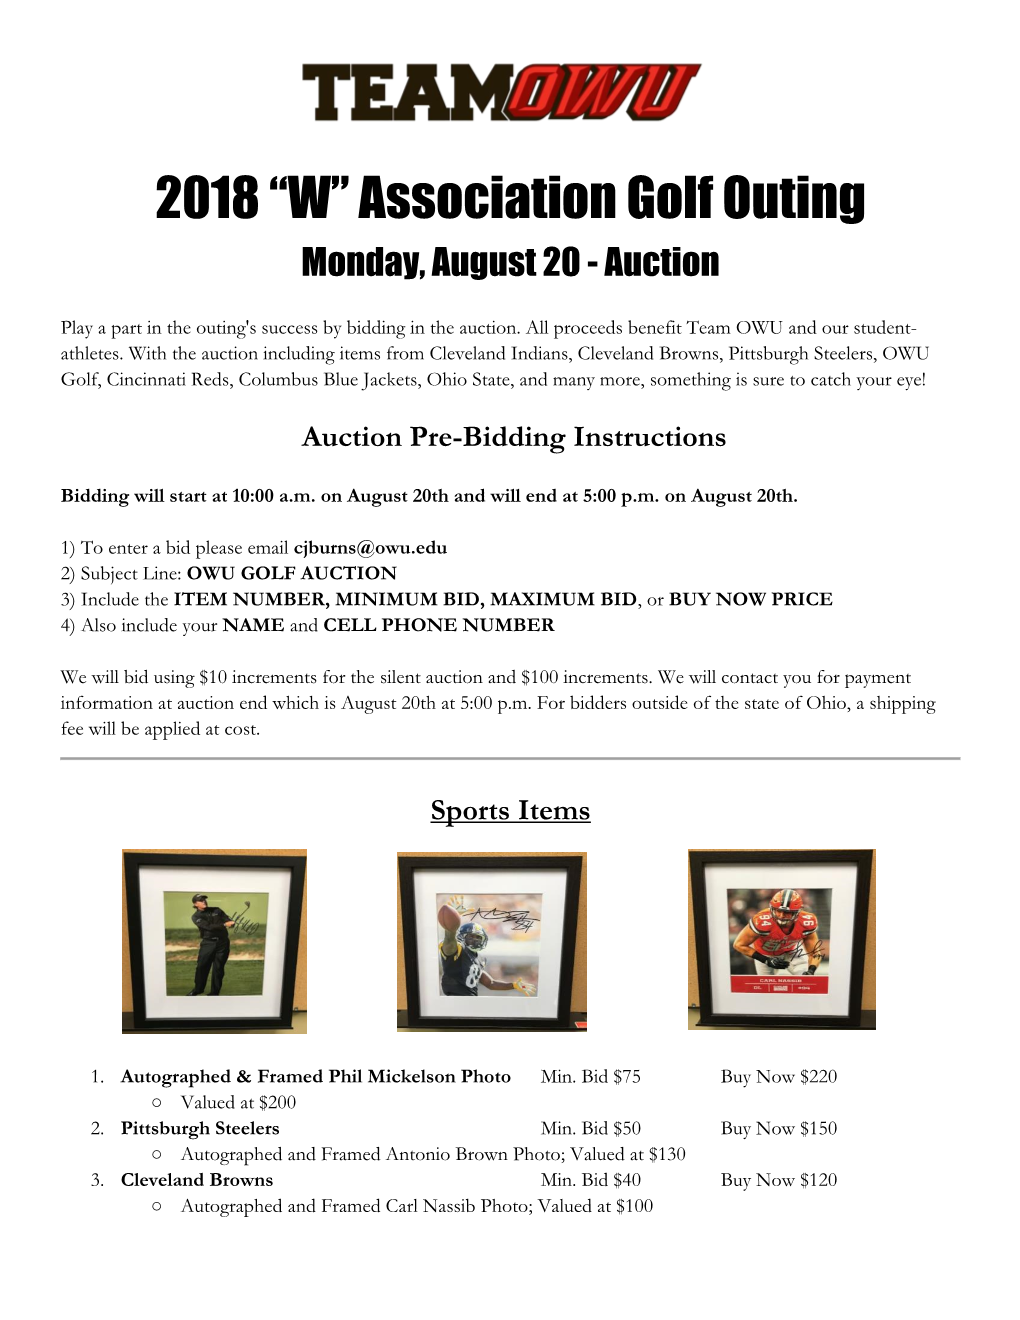 2018 “W” Association Golf Outing Monday, August 20 - Auction